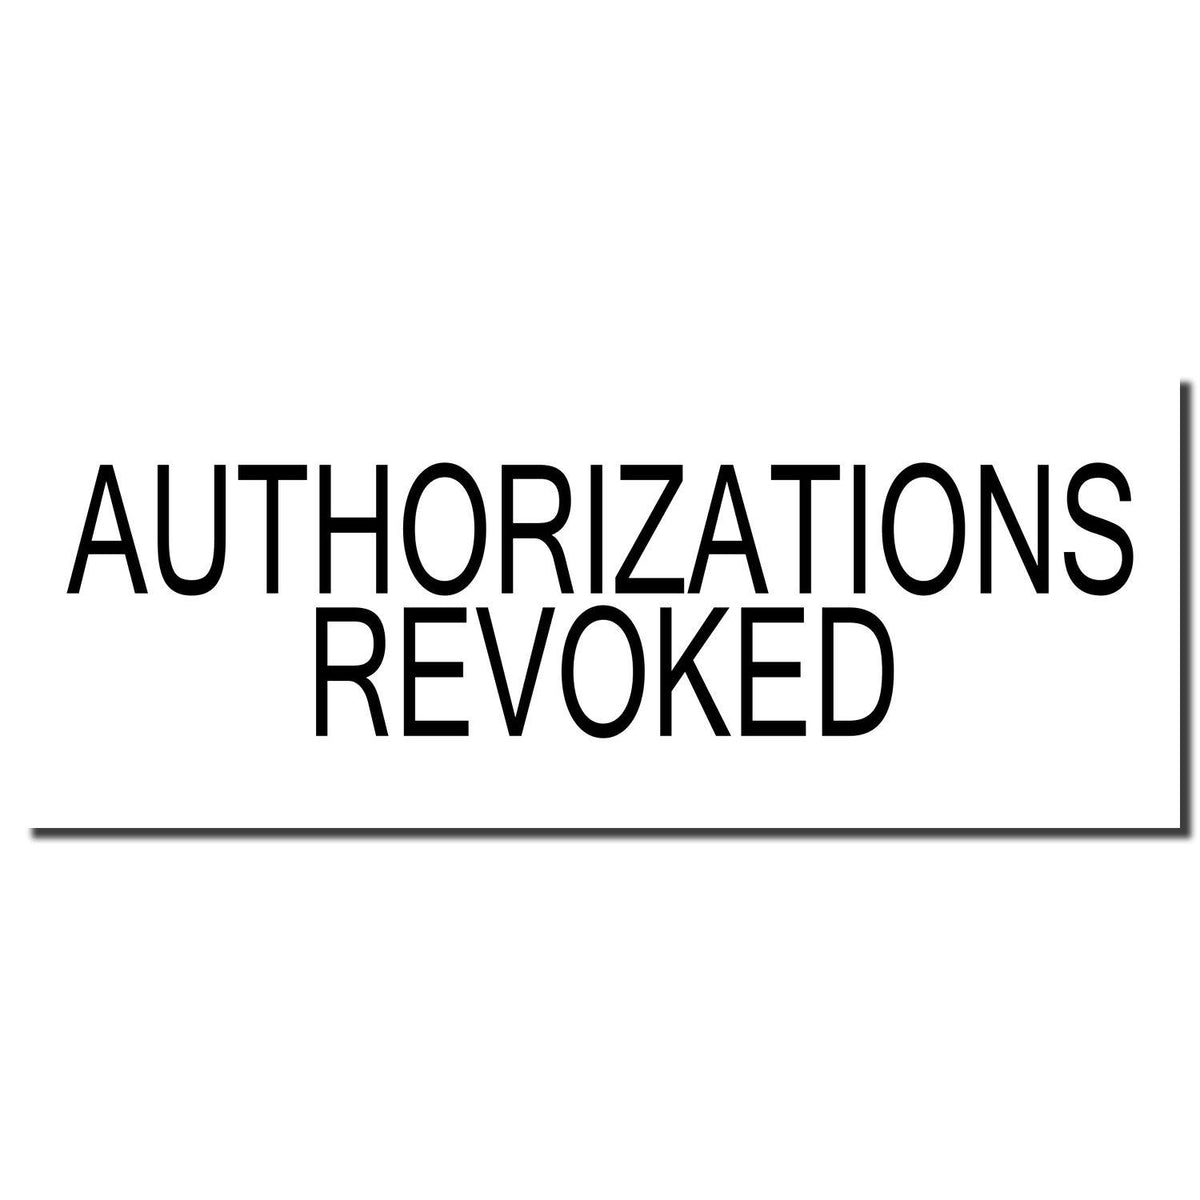 Enlarged Imprint Authorizations Revoked Rubber Stamp Sample